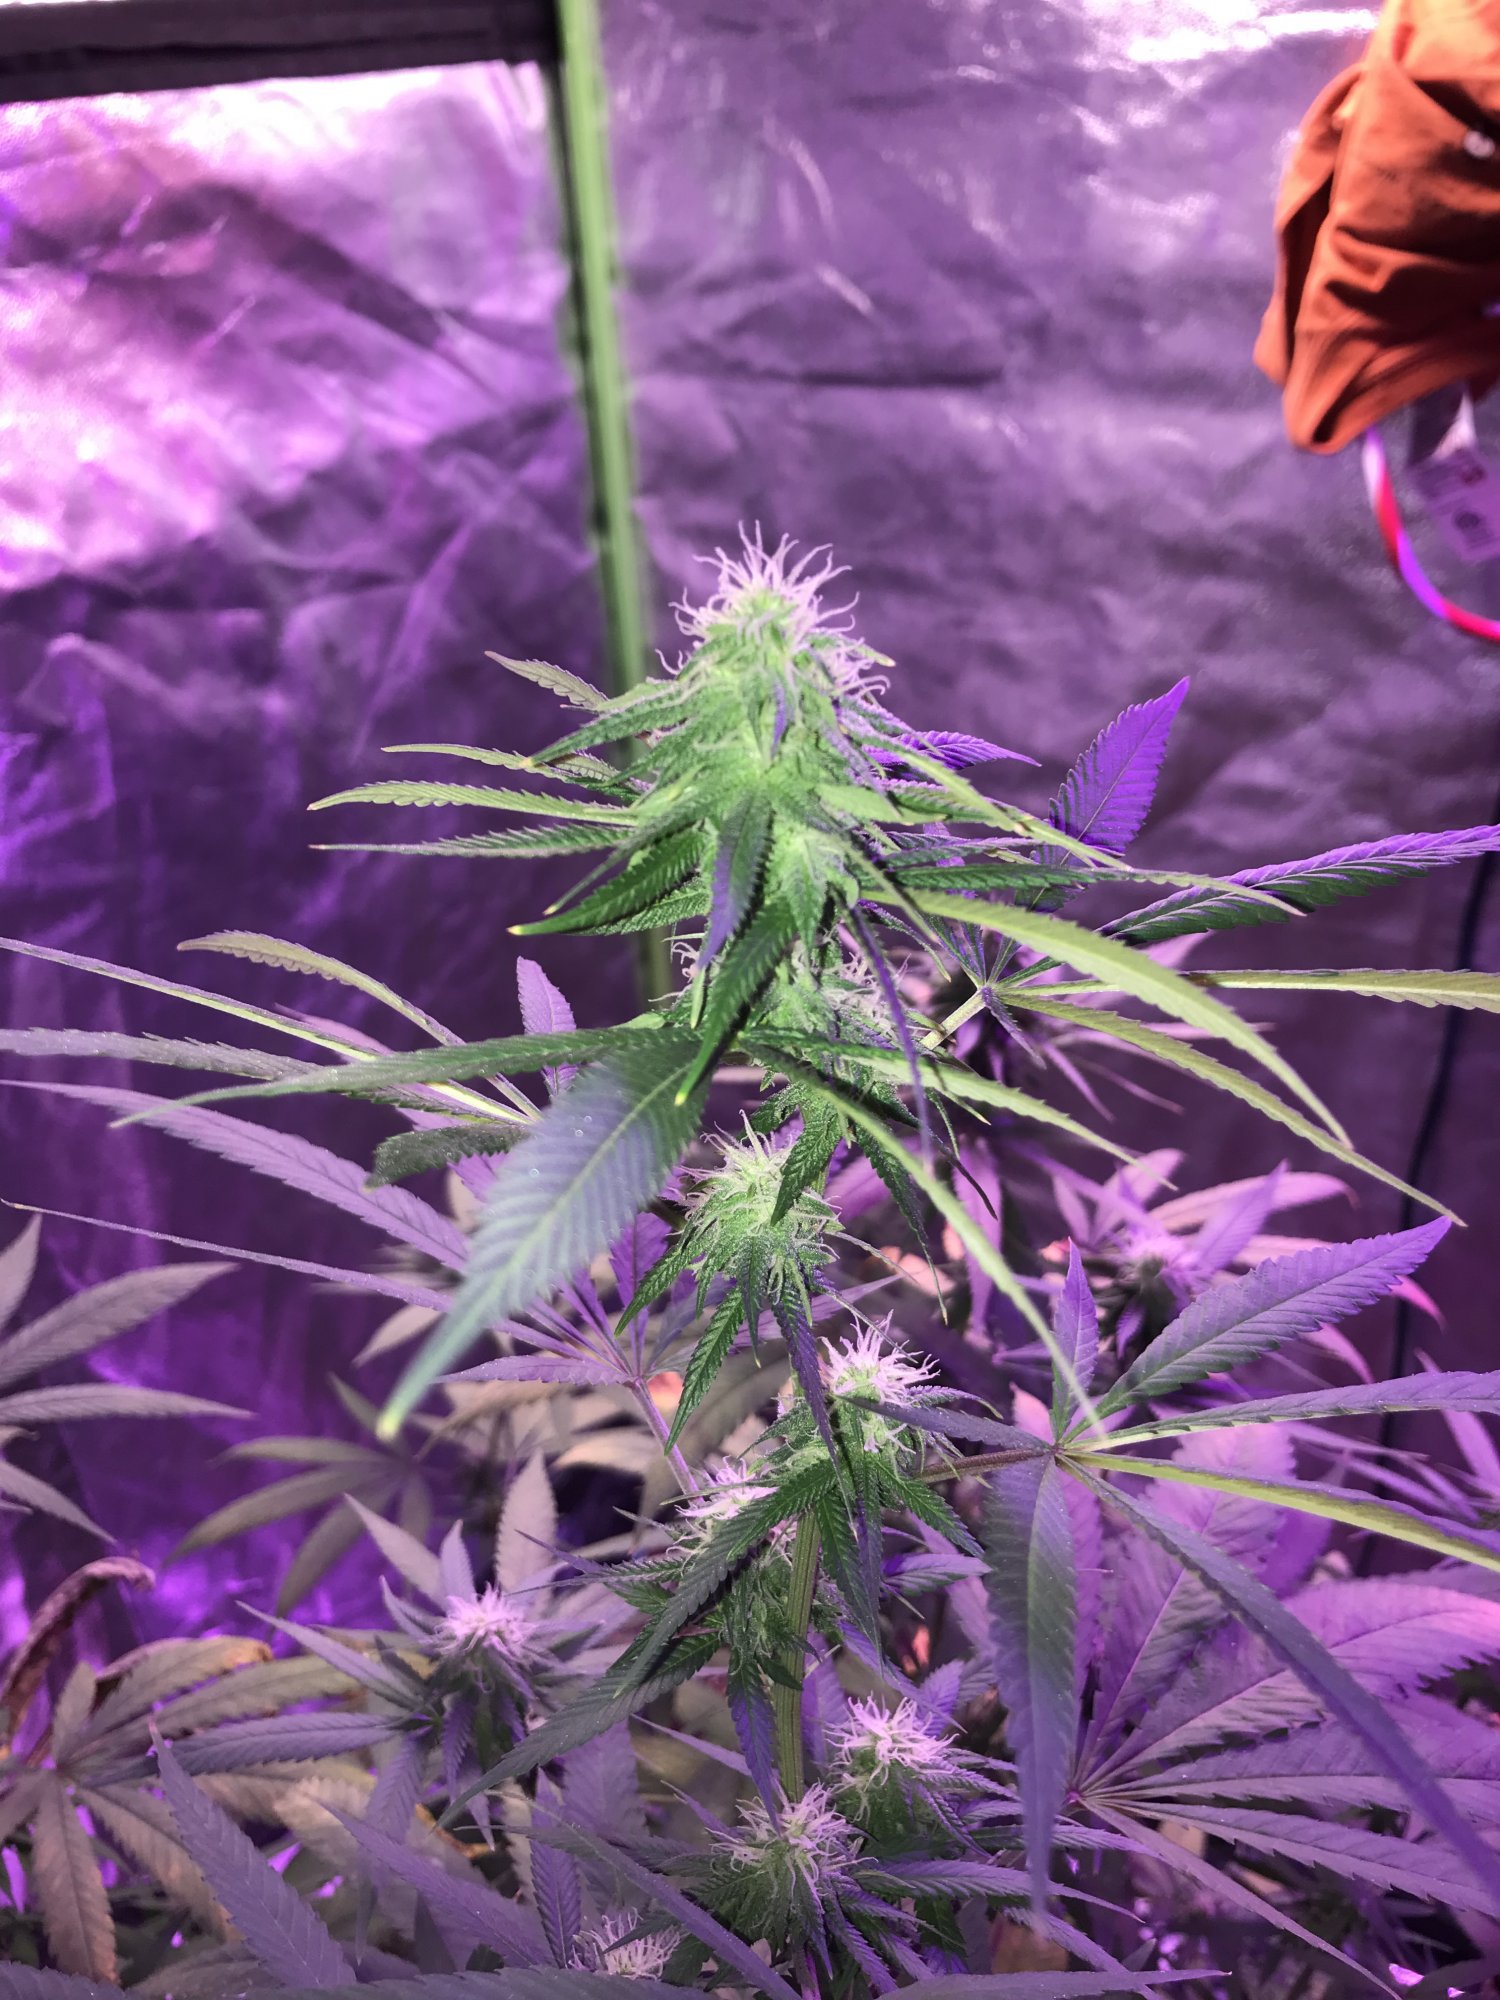 Nutrient burn or heat stress not sure what to do 10